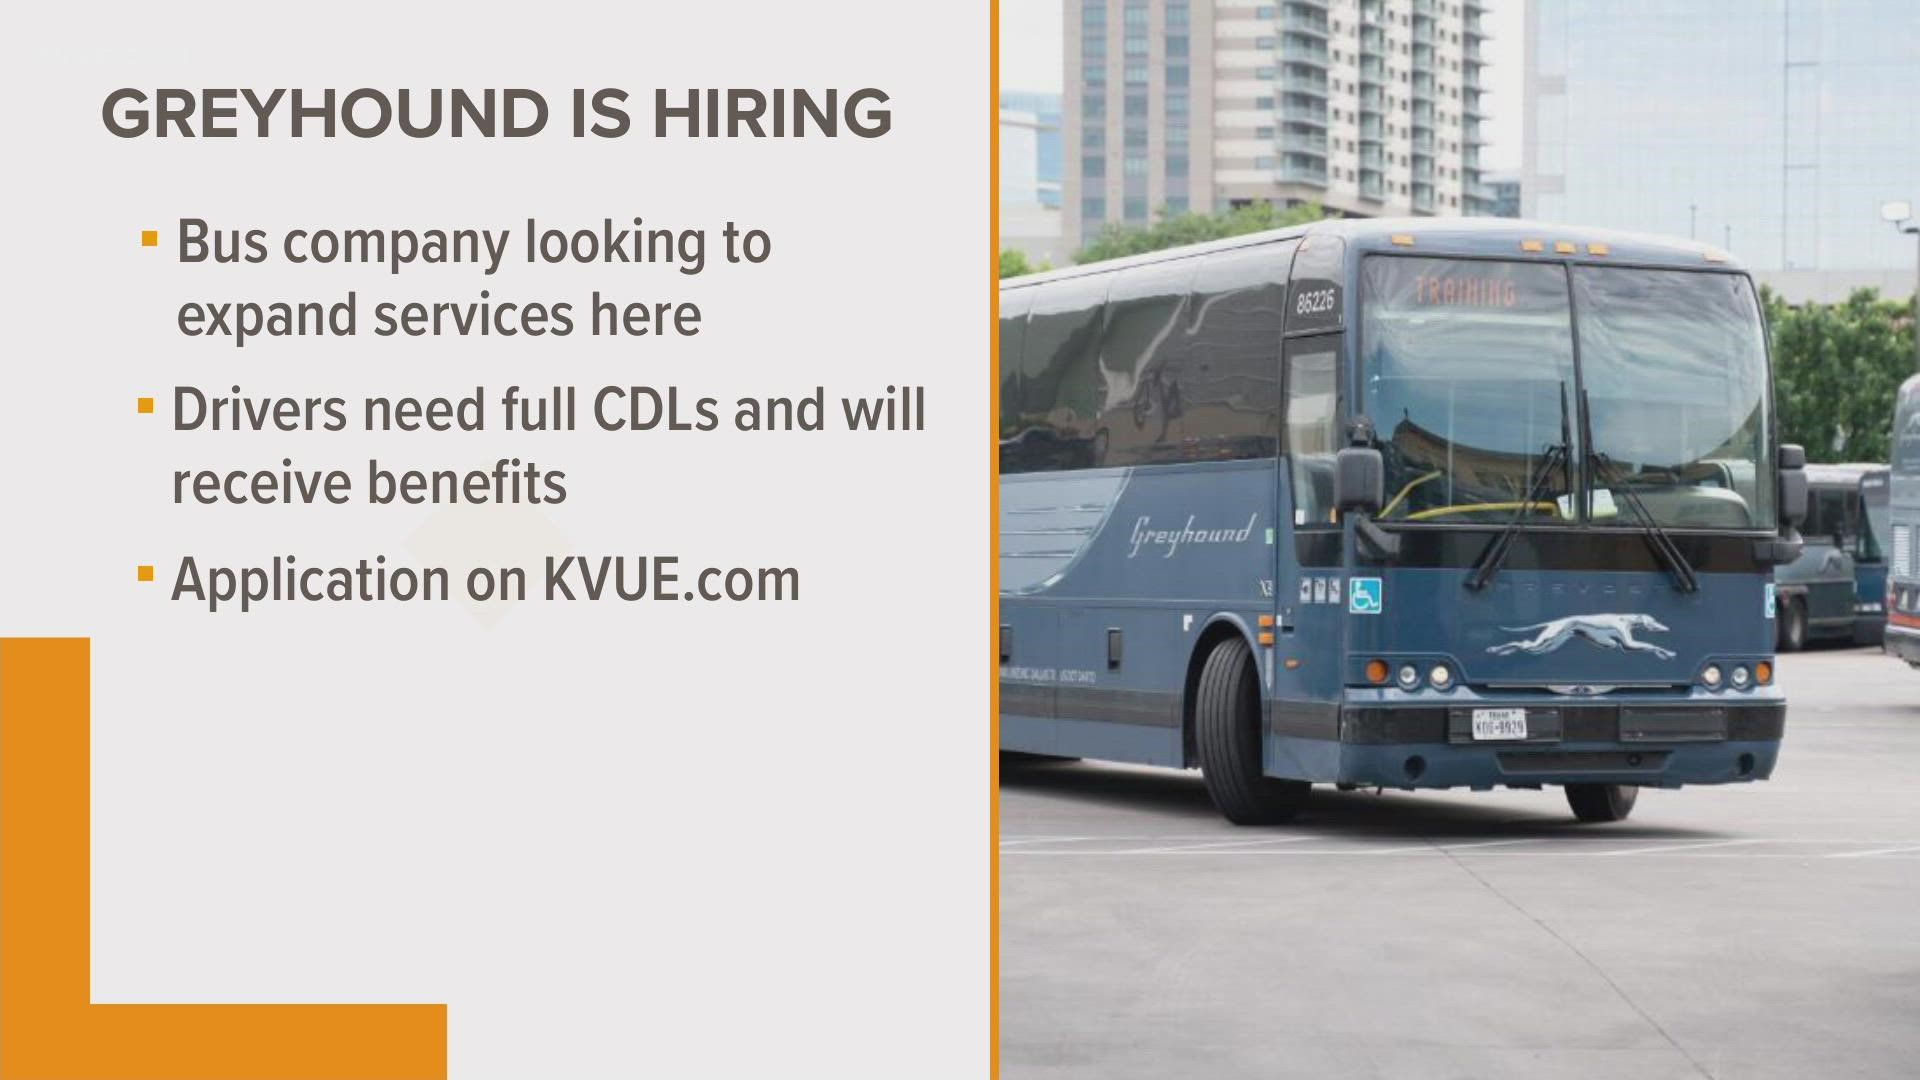 Greyhound needs more drivers in the Austin area.